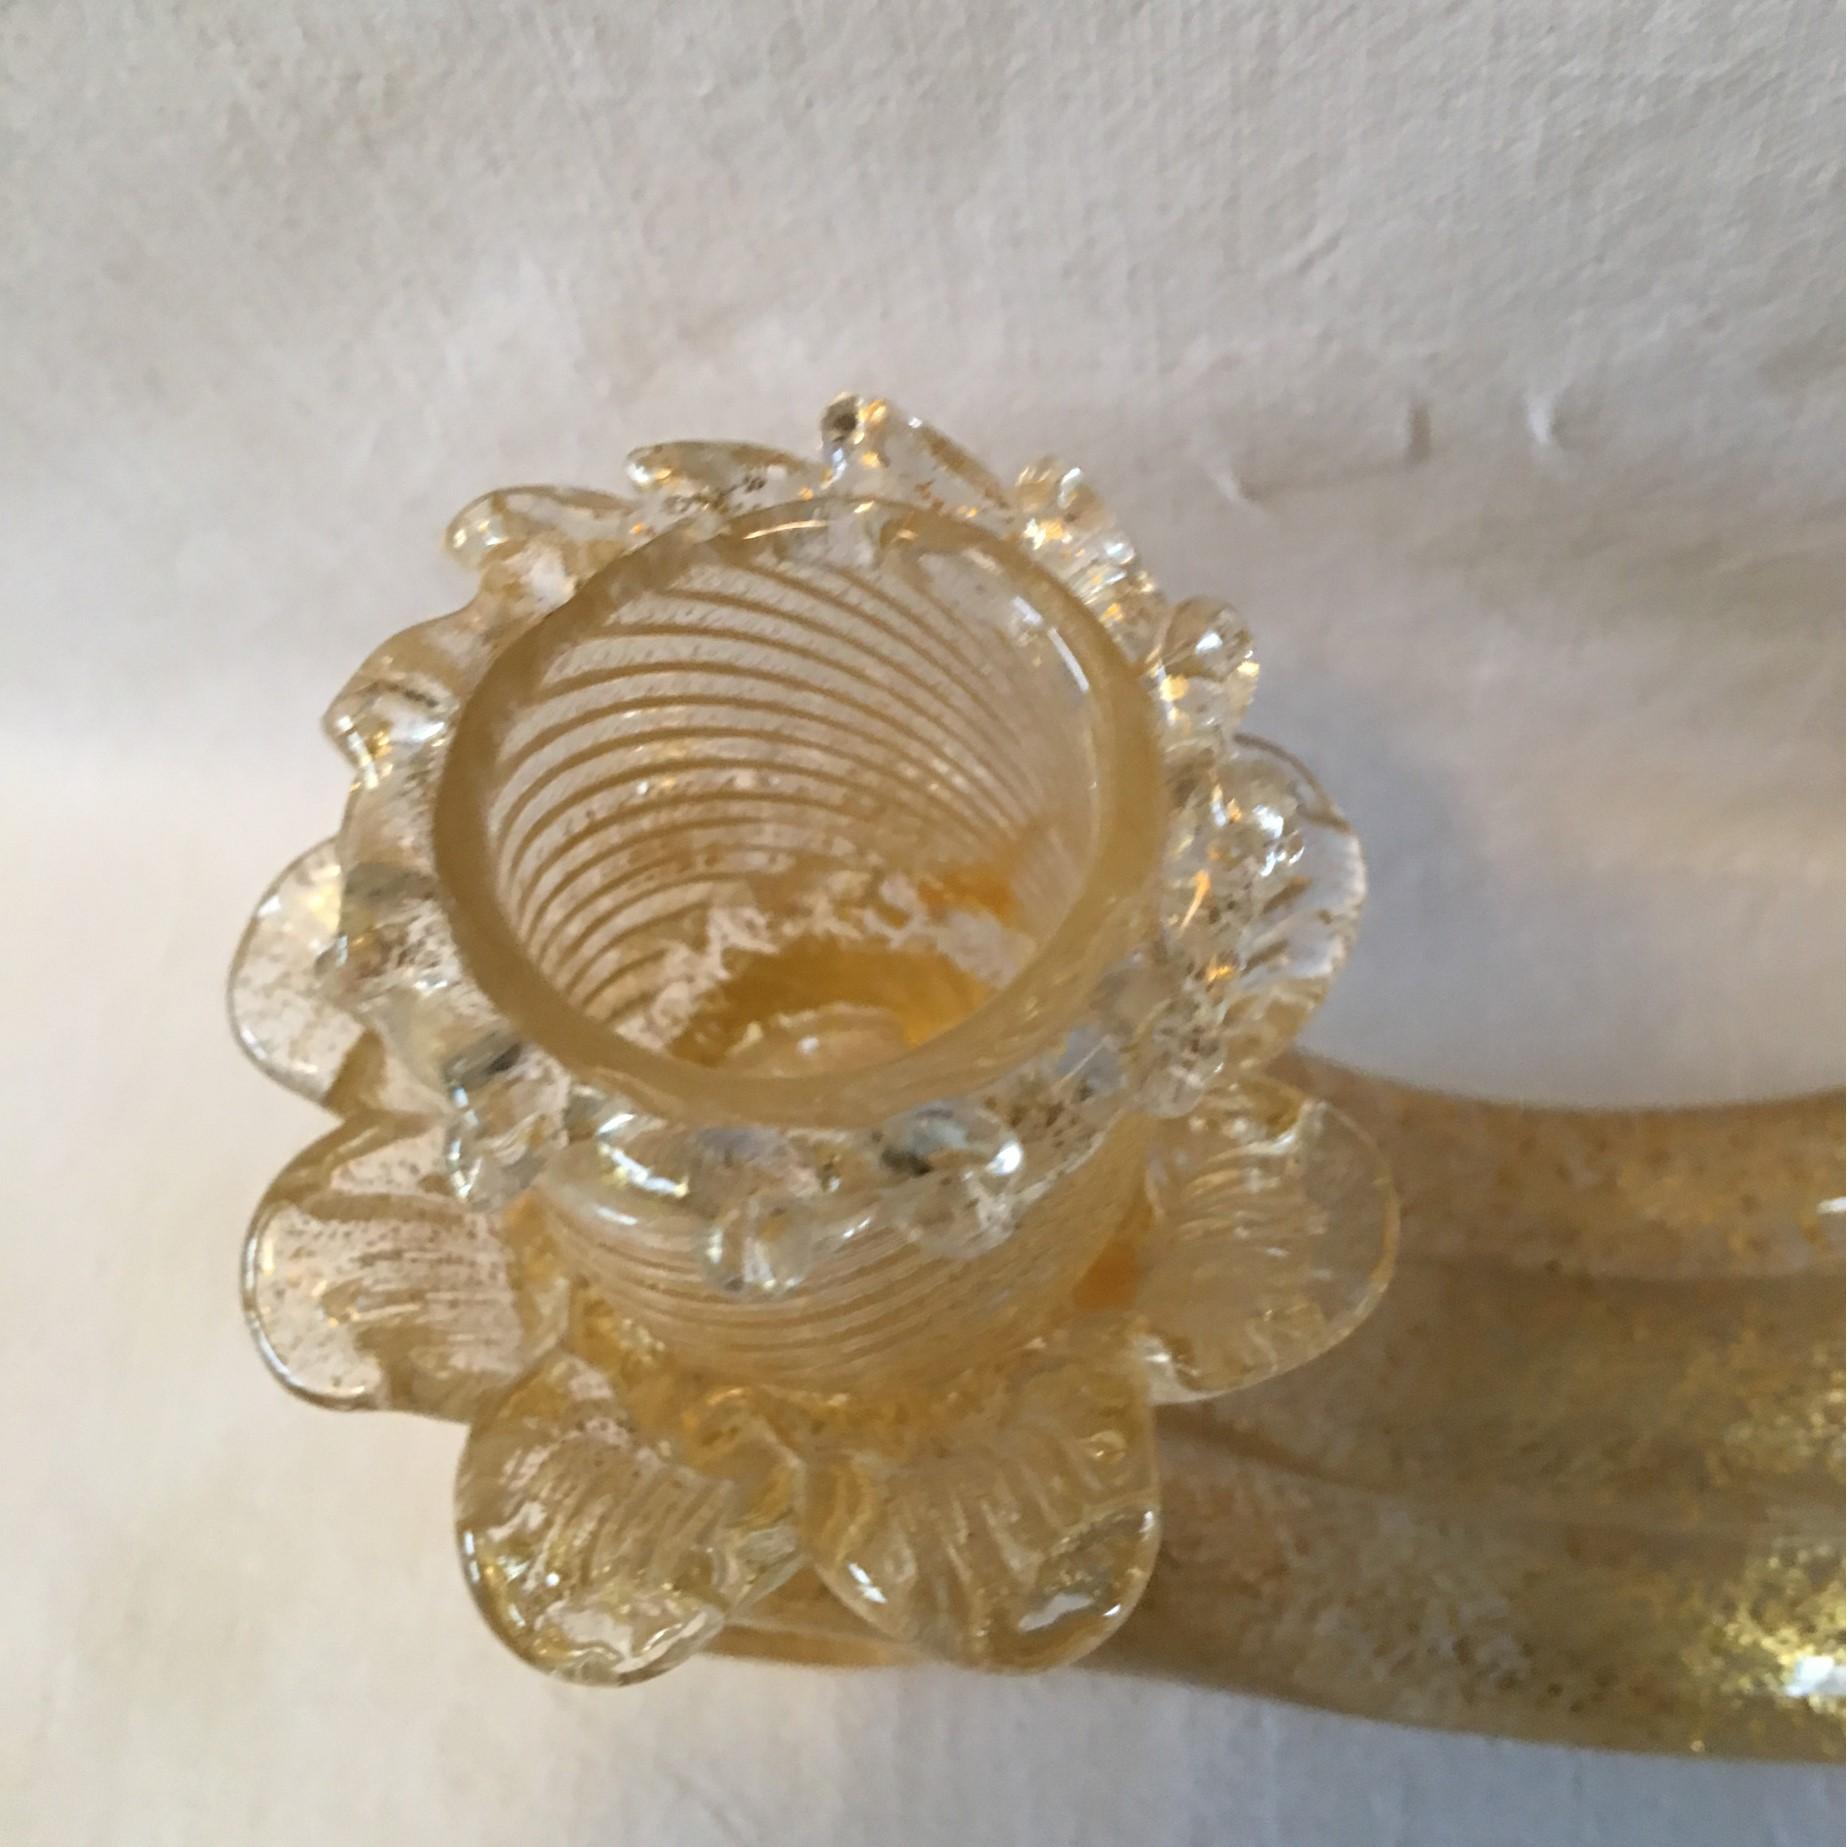 Mid-20th Century Murano Gold Flake Glass Candleholder Barovier e Toso Style, 1950s For Sale